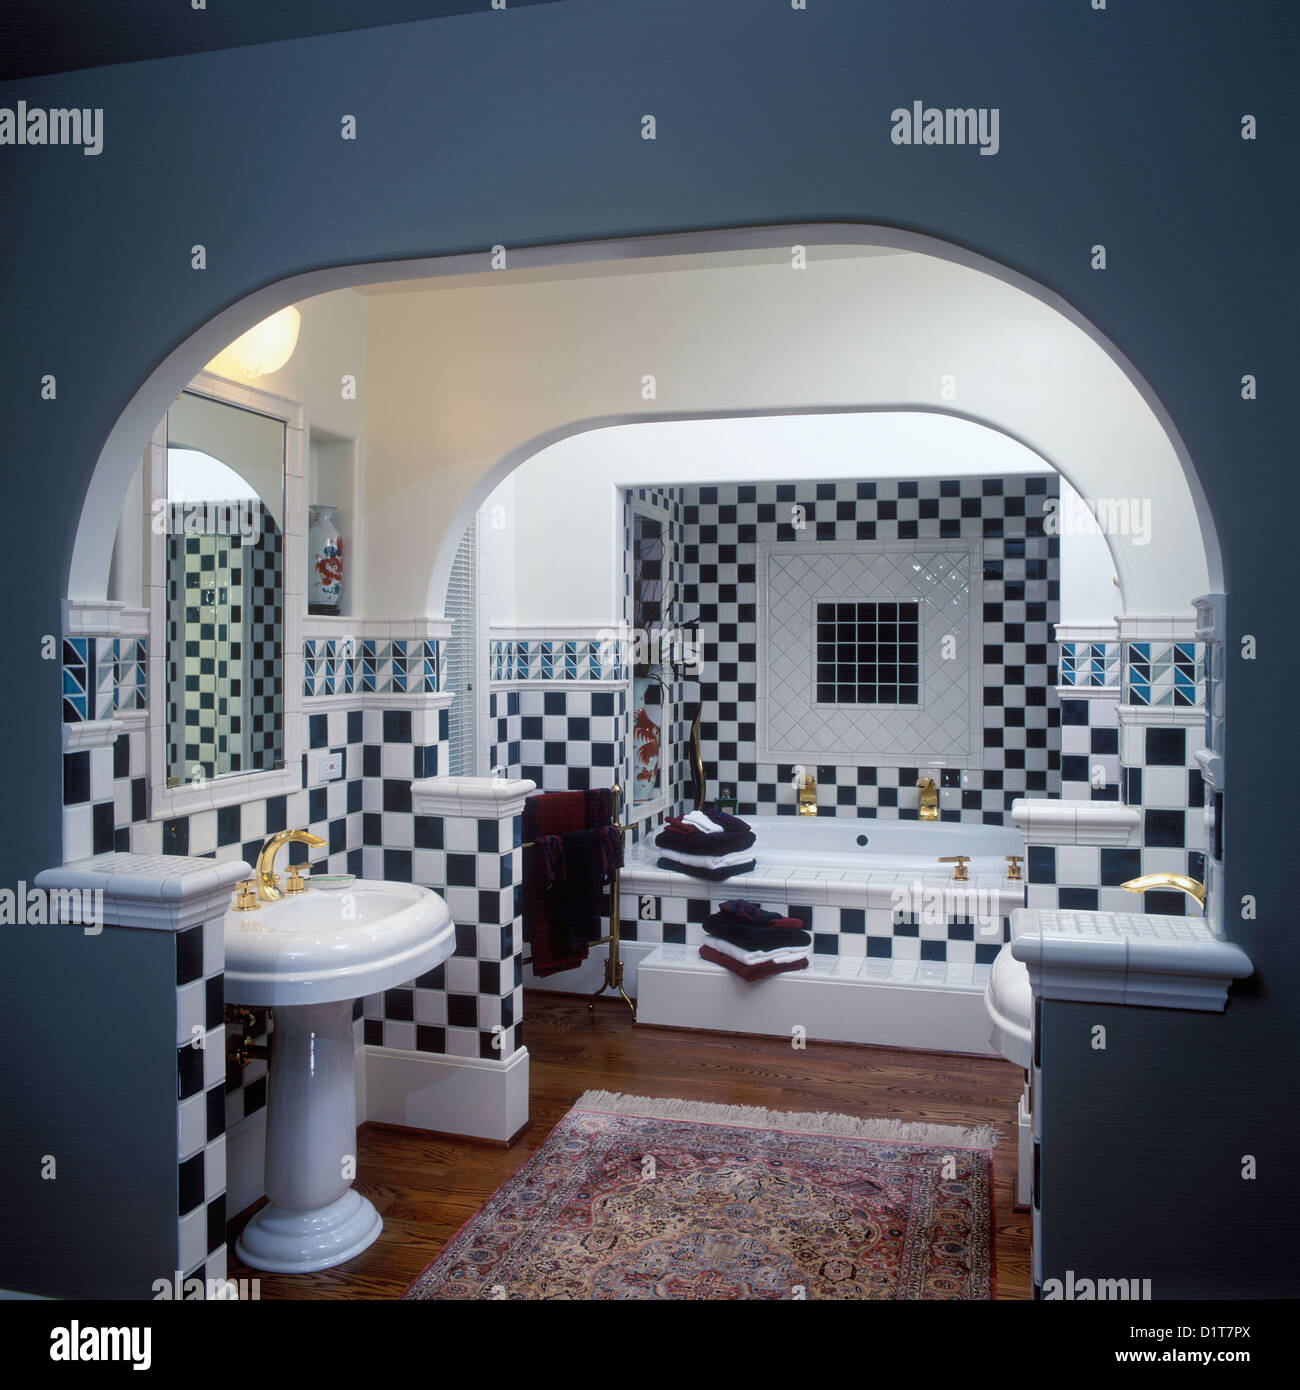 BATHROOMS Contemporary Dark green and white checkerboard pattern ceramic  tiles on walls and above tub Arched ceiling painted Stock Photo - Alamy